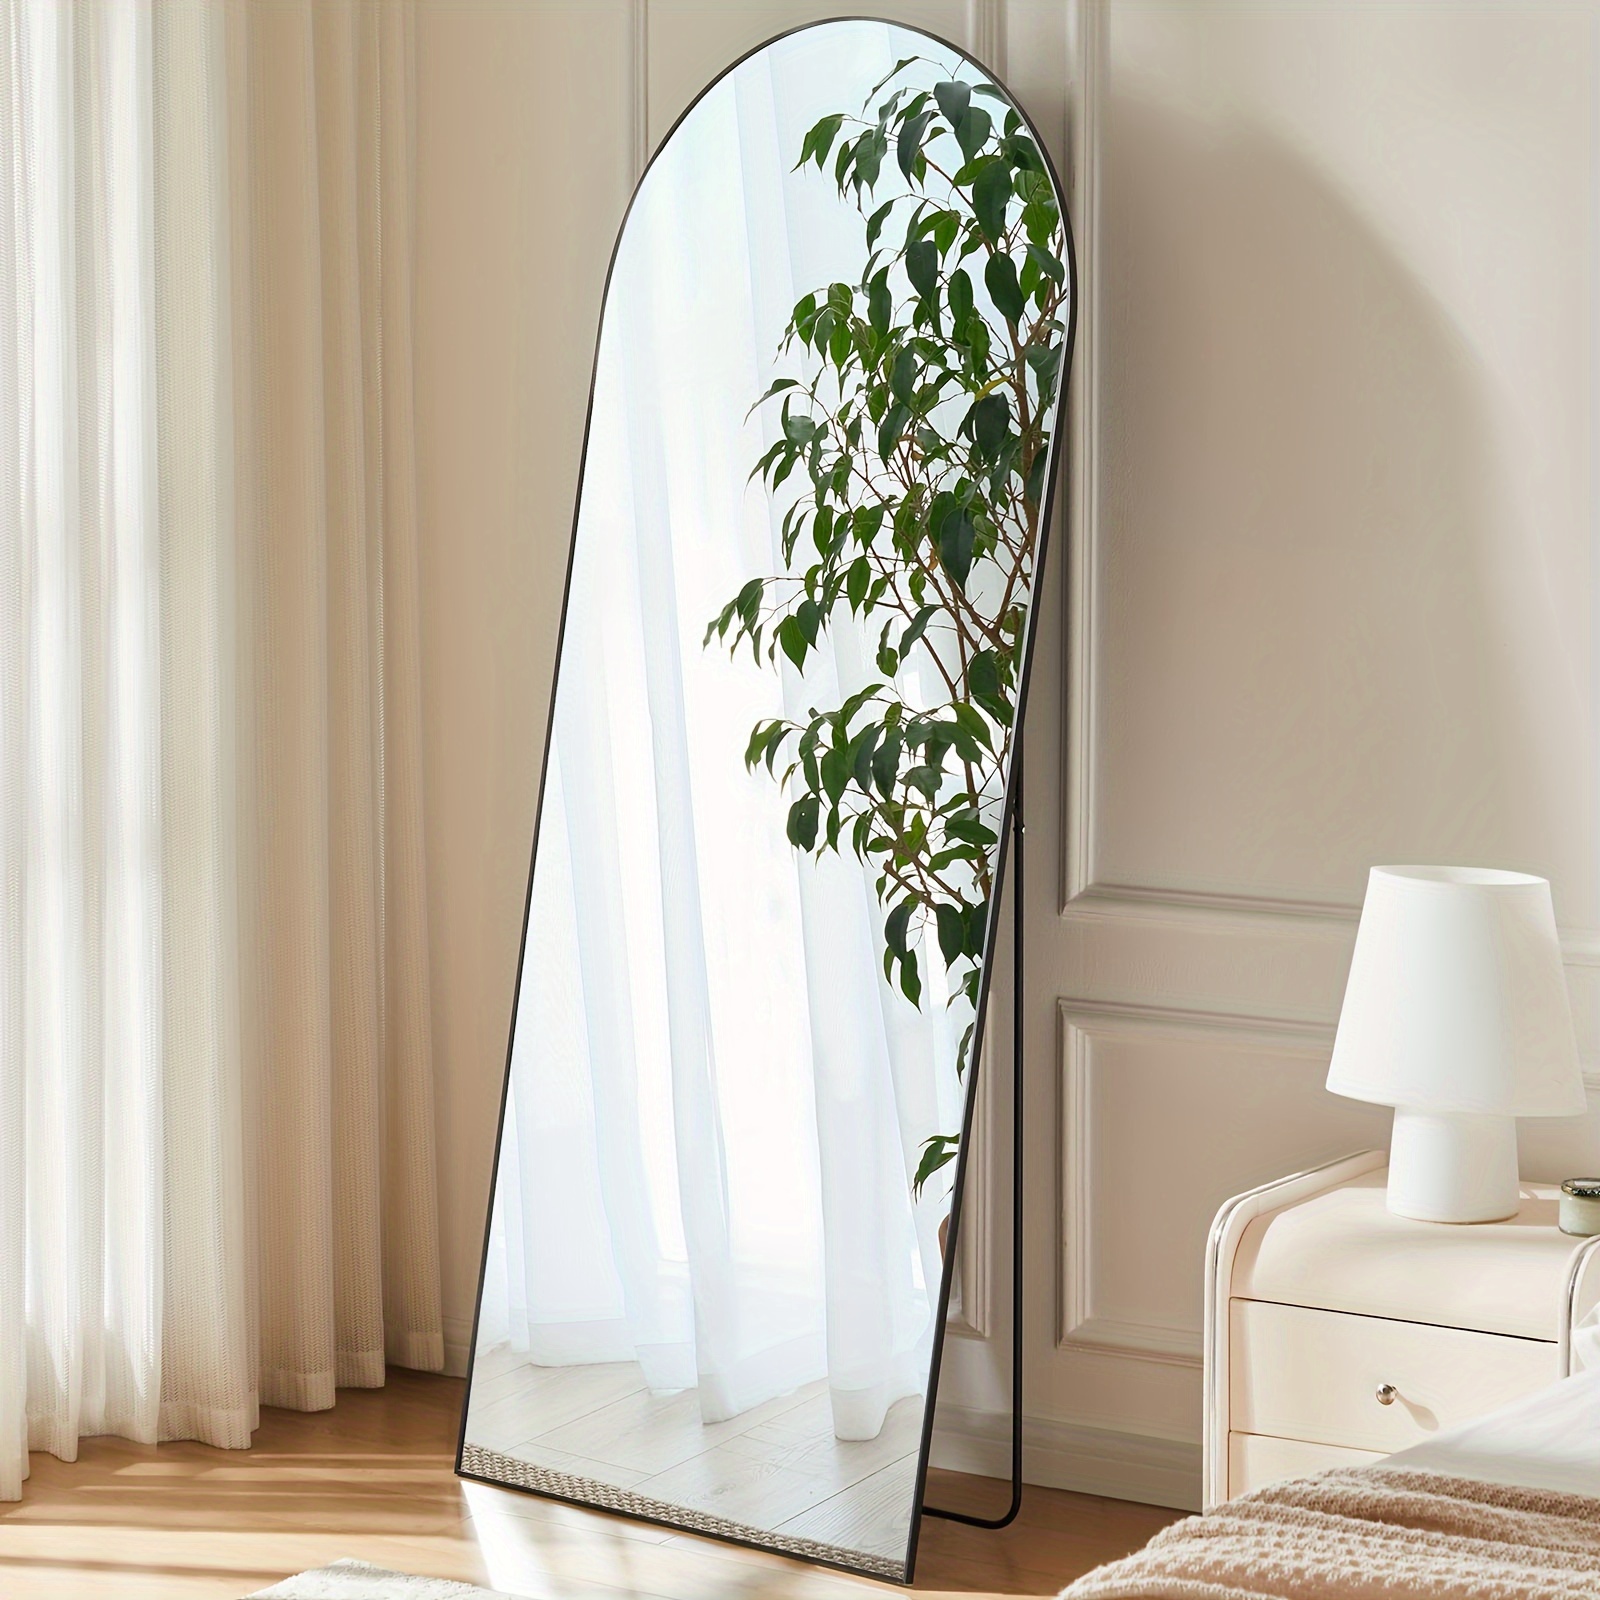 

Full Length Mirror With Stand, Floor Mirror With Aluminum Alloy Frame For Bedroom, Standing Full Body Mirror With Shatter-proof Nano Glass For Wall, Living Room, Cloakroom